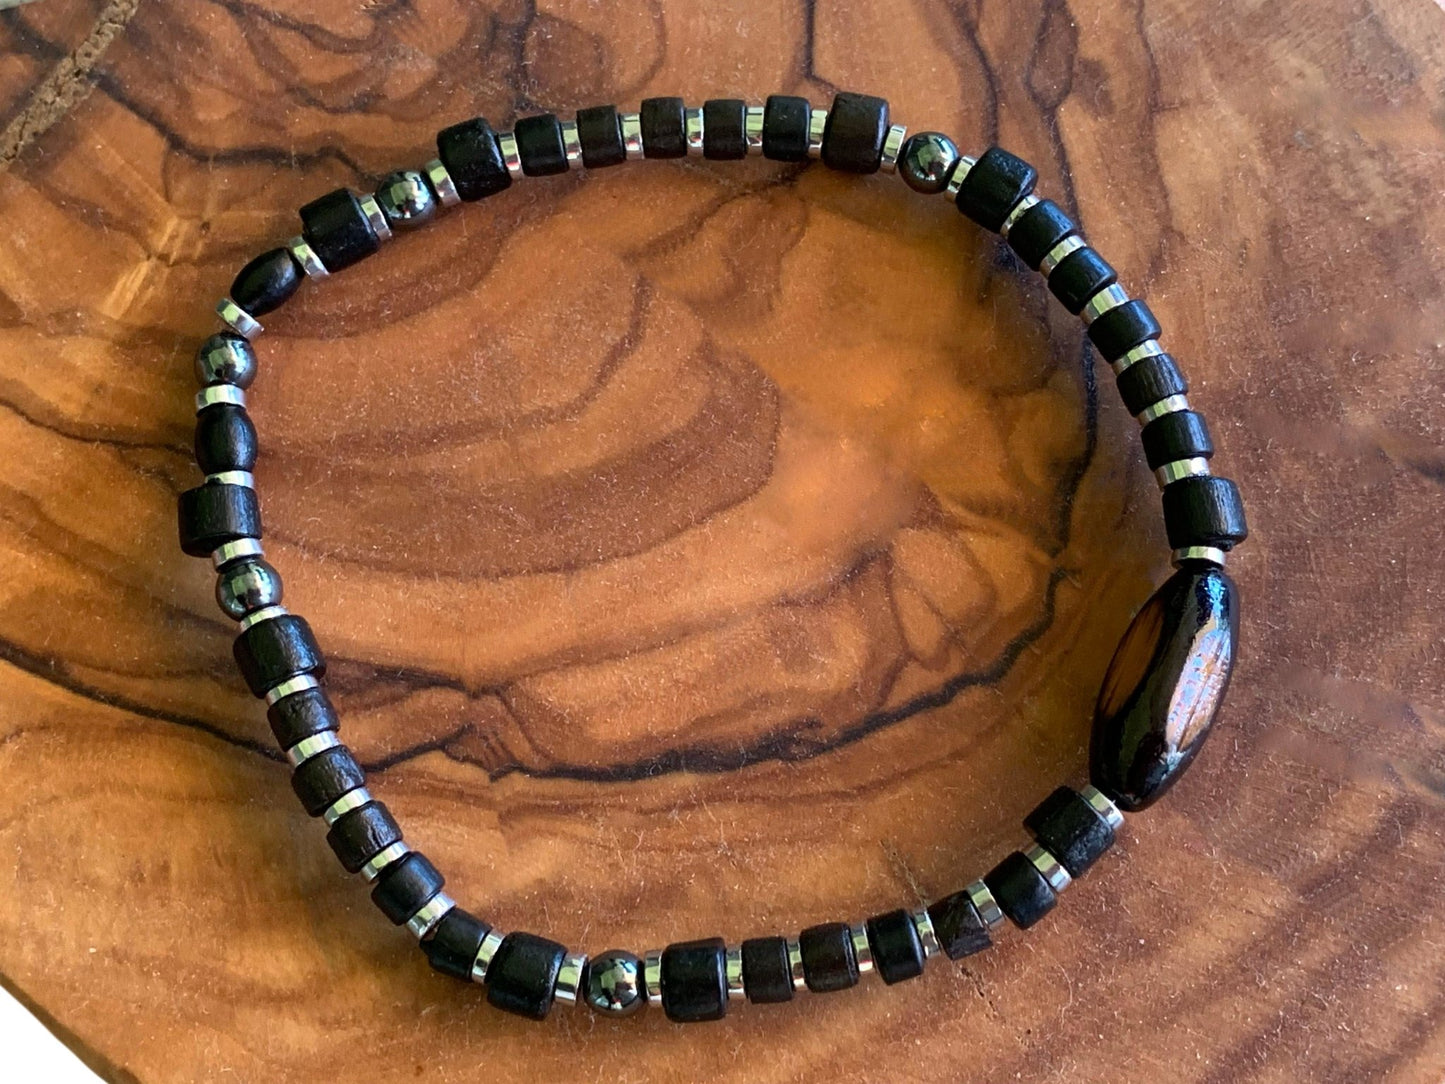 🔴SOLD🔴 Silas Handmade Wood and Silver Plated Hematite Expandable Beaded Bracelet - Born Mystics